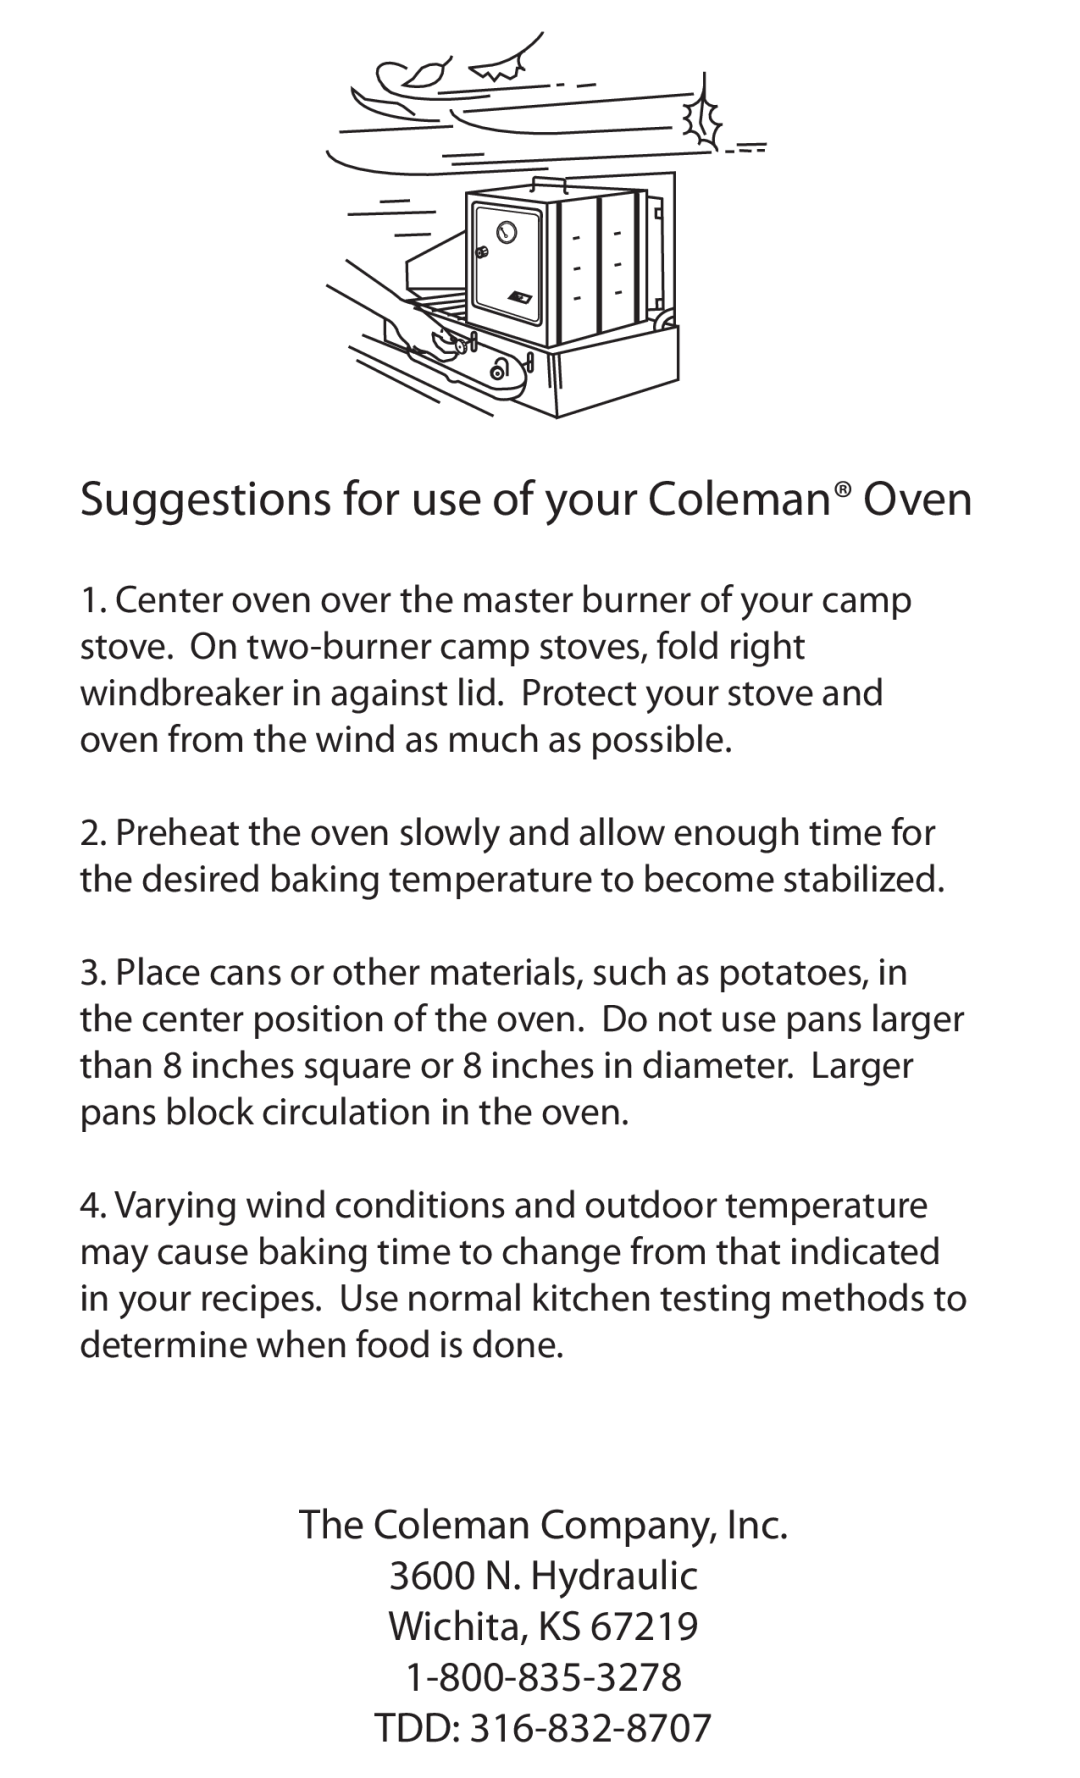 Coleman 5010 manual Suggestions for use of your Coleman Oven, The Coleman Company, Inc 3600 N. Hydraulic Wichita, KS 